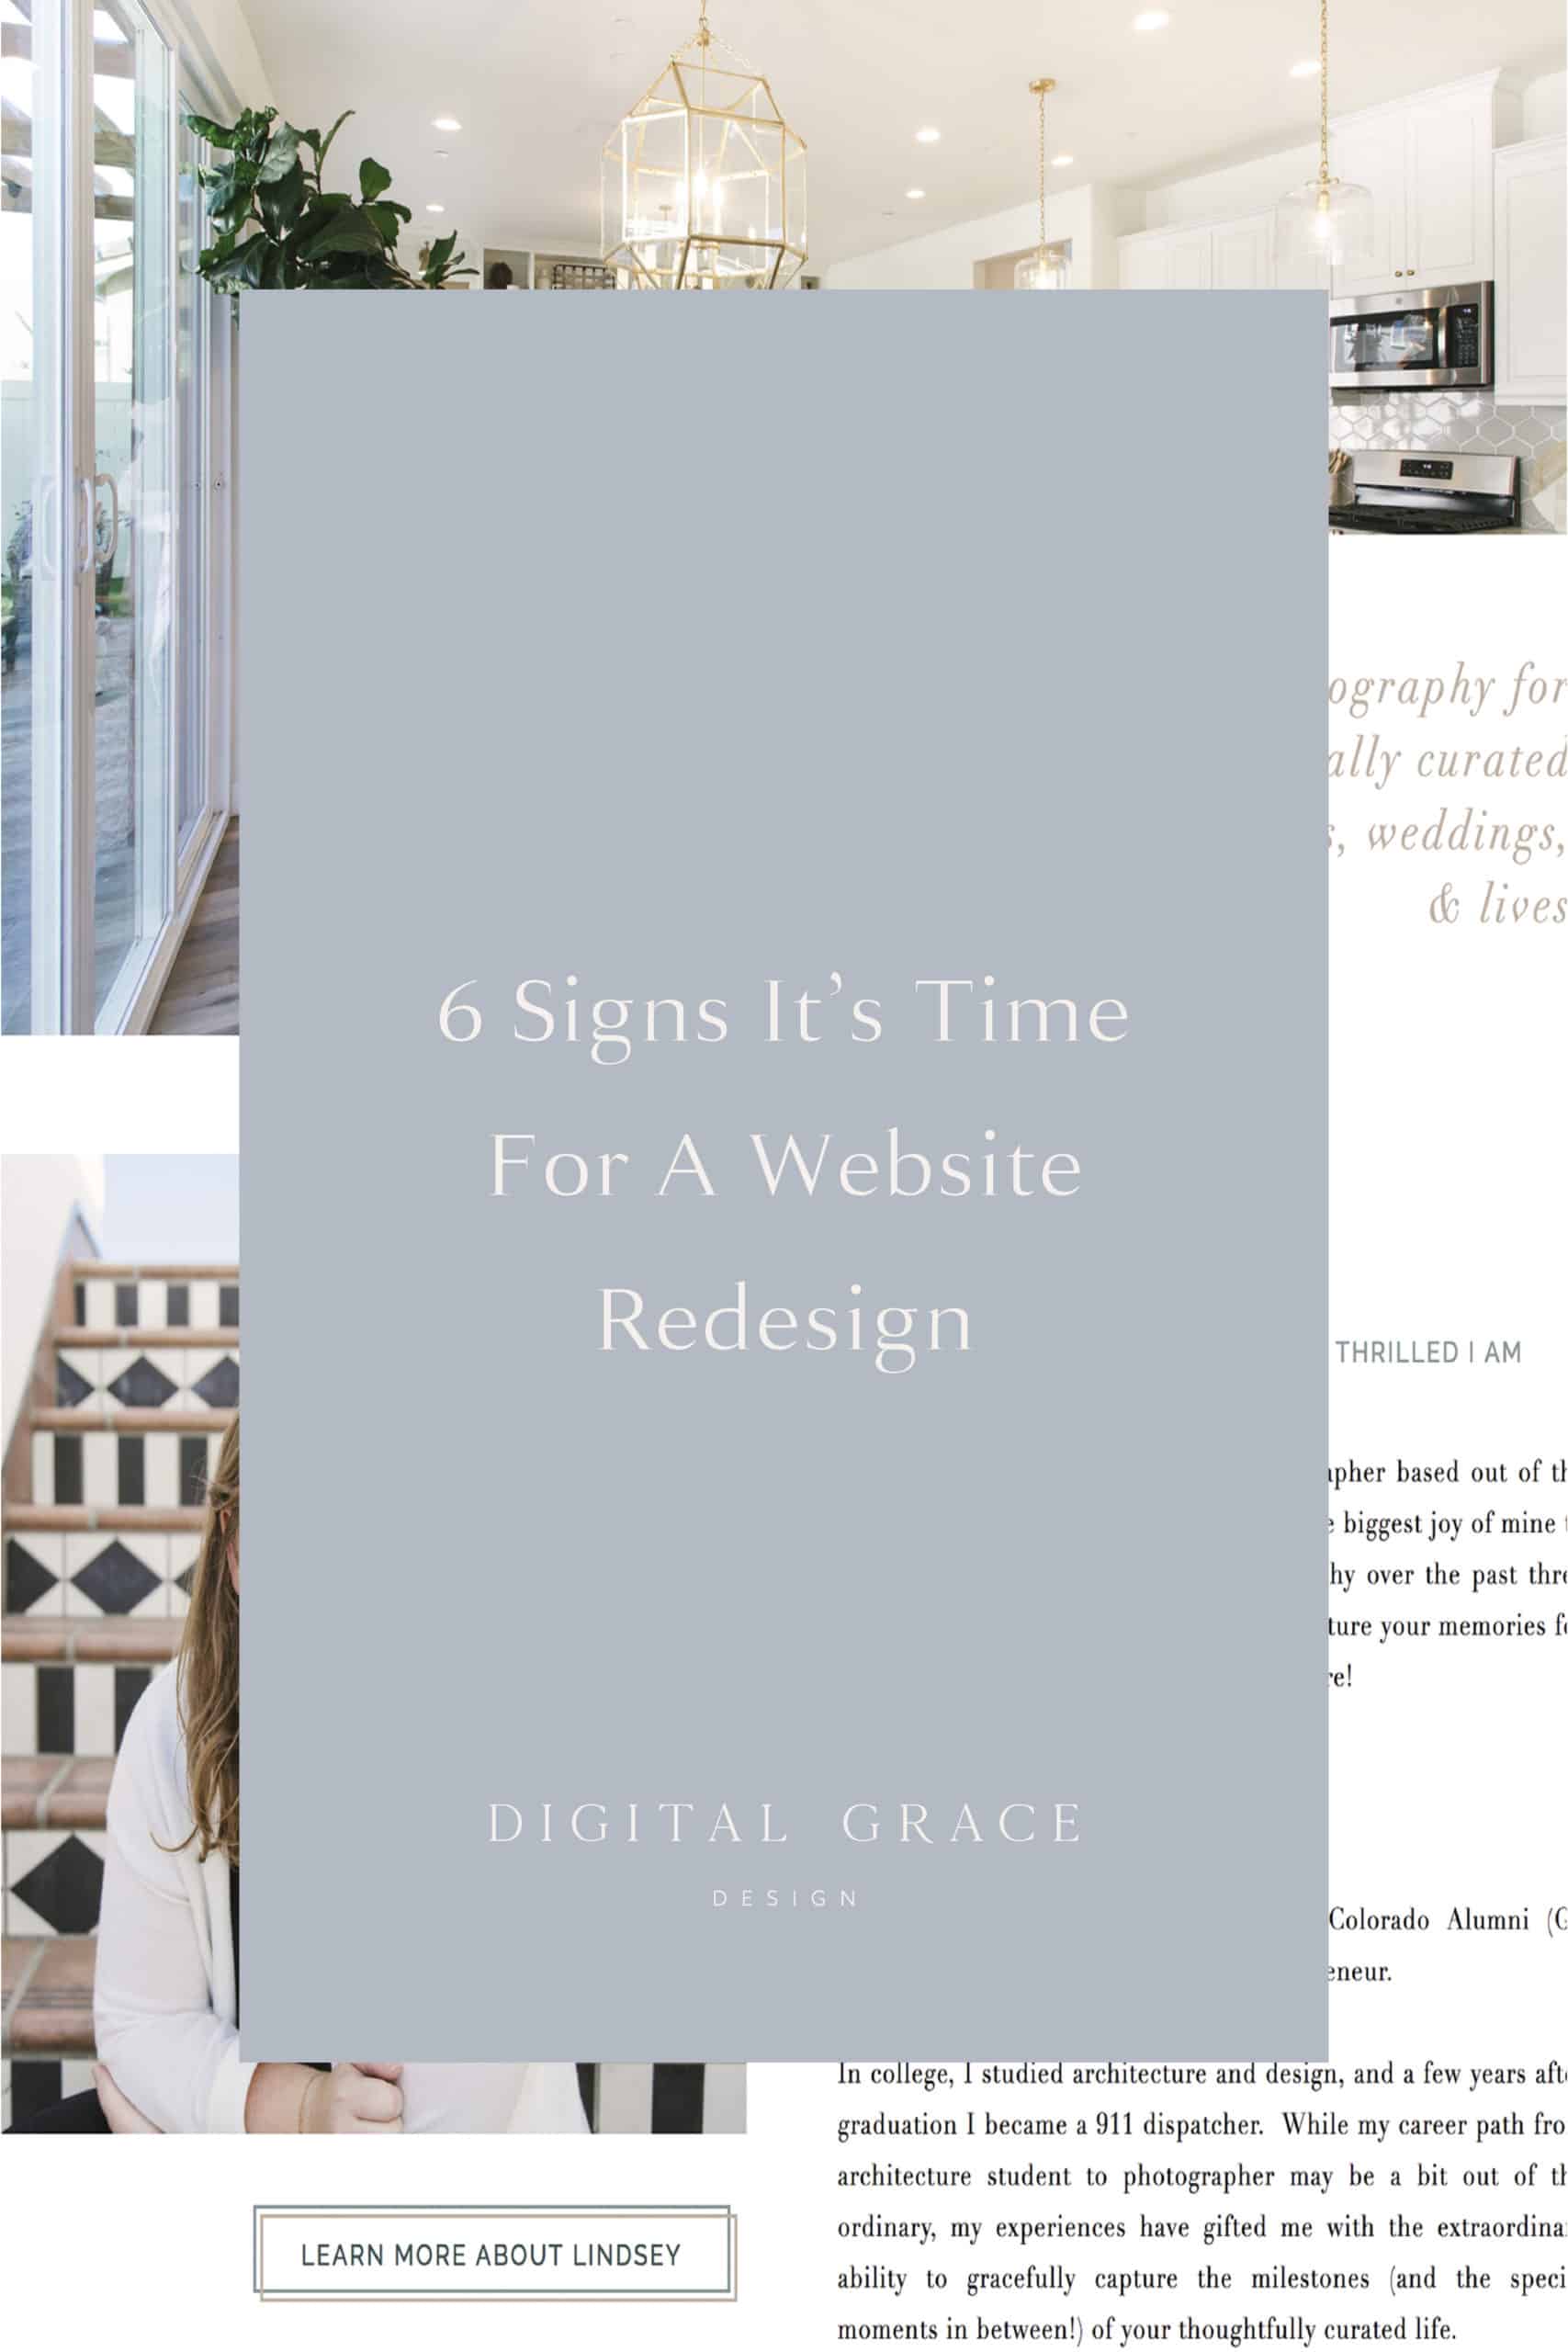 6 Signs It's Time for a Website Redesign